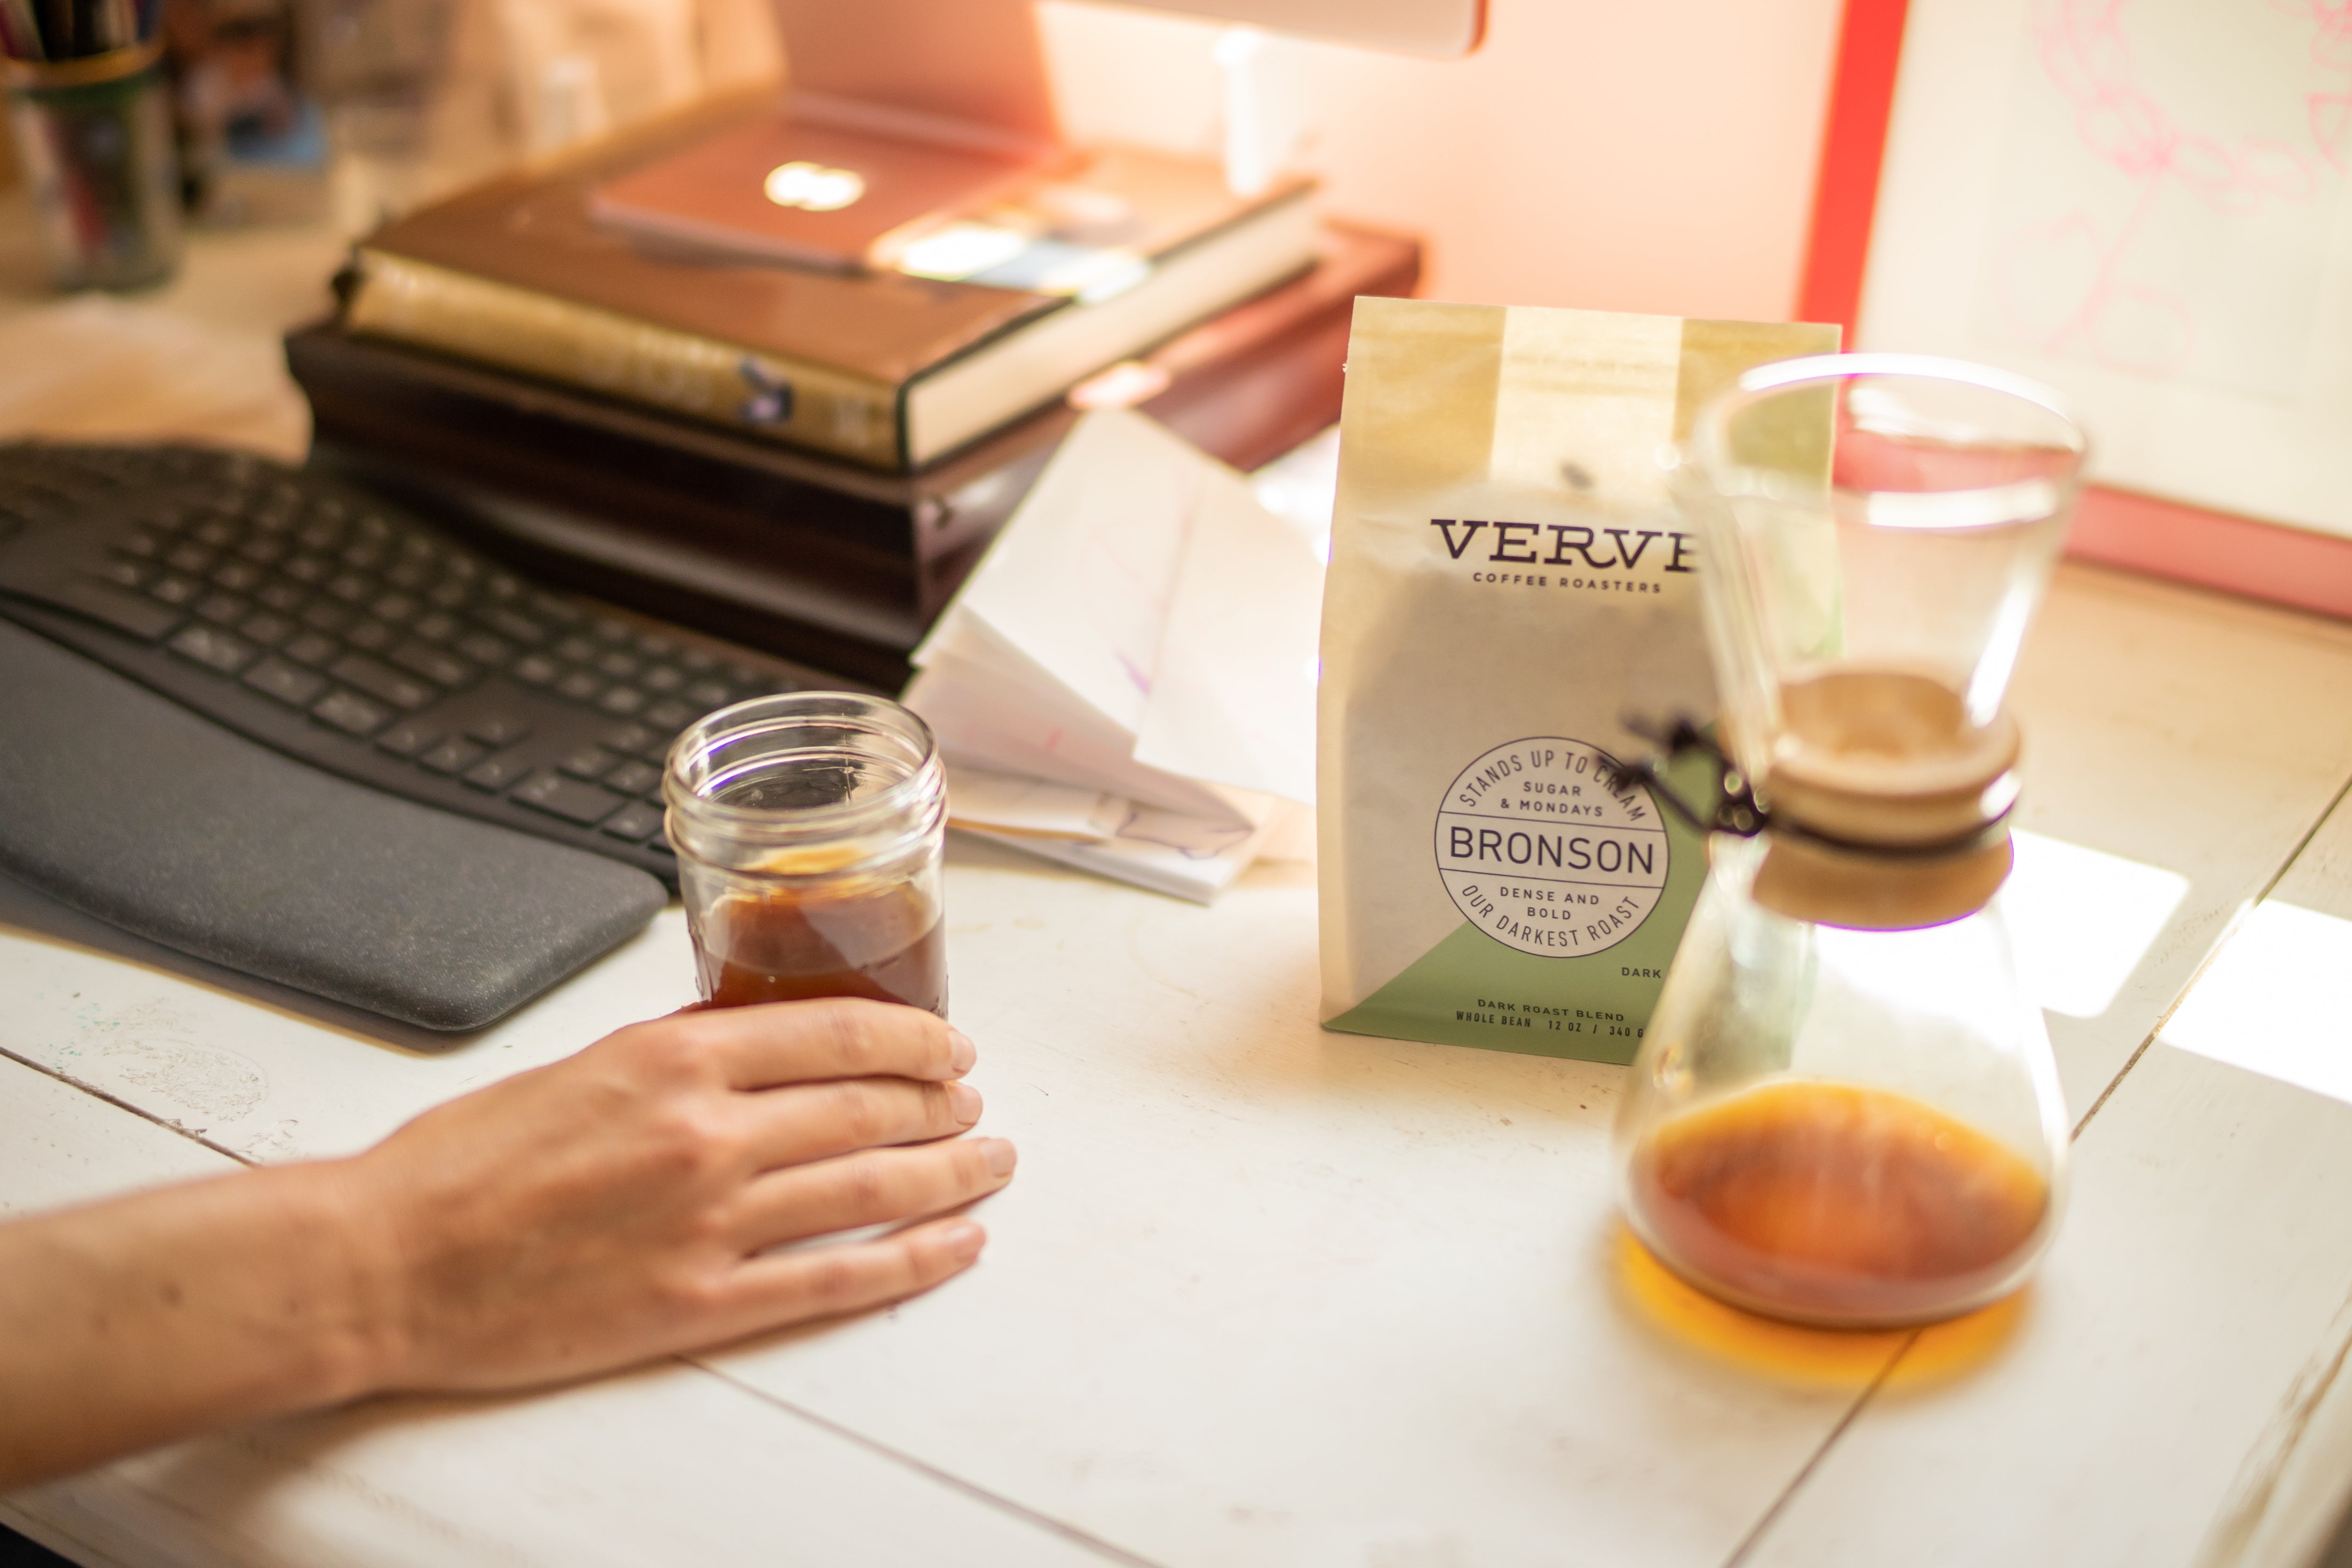 A bag of Verve Coffee’s Bronson French Roast Molasses Dark Chocolate Fig flavor sitting on a desk next to a drip coffee maker, a hand holding a glass of coffee, and a keyboard. 